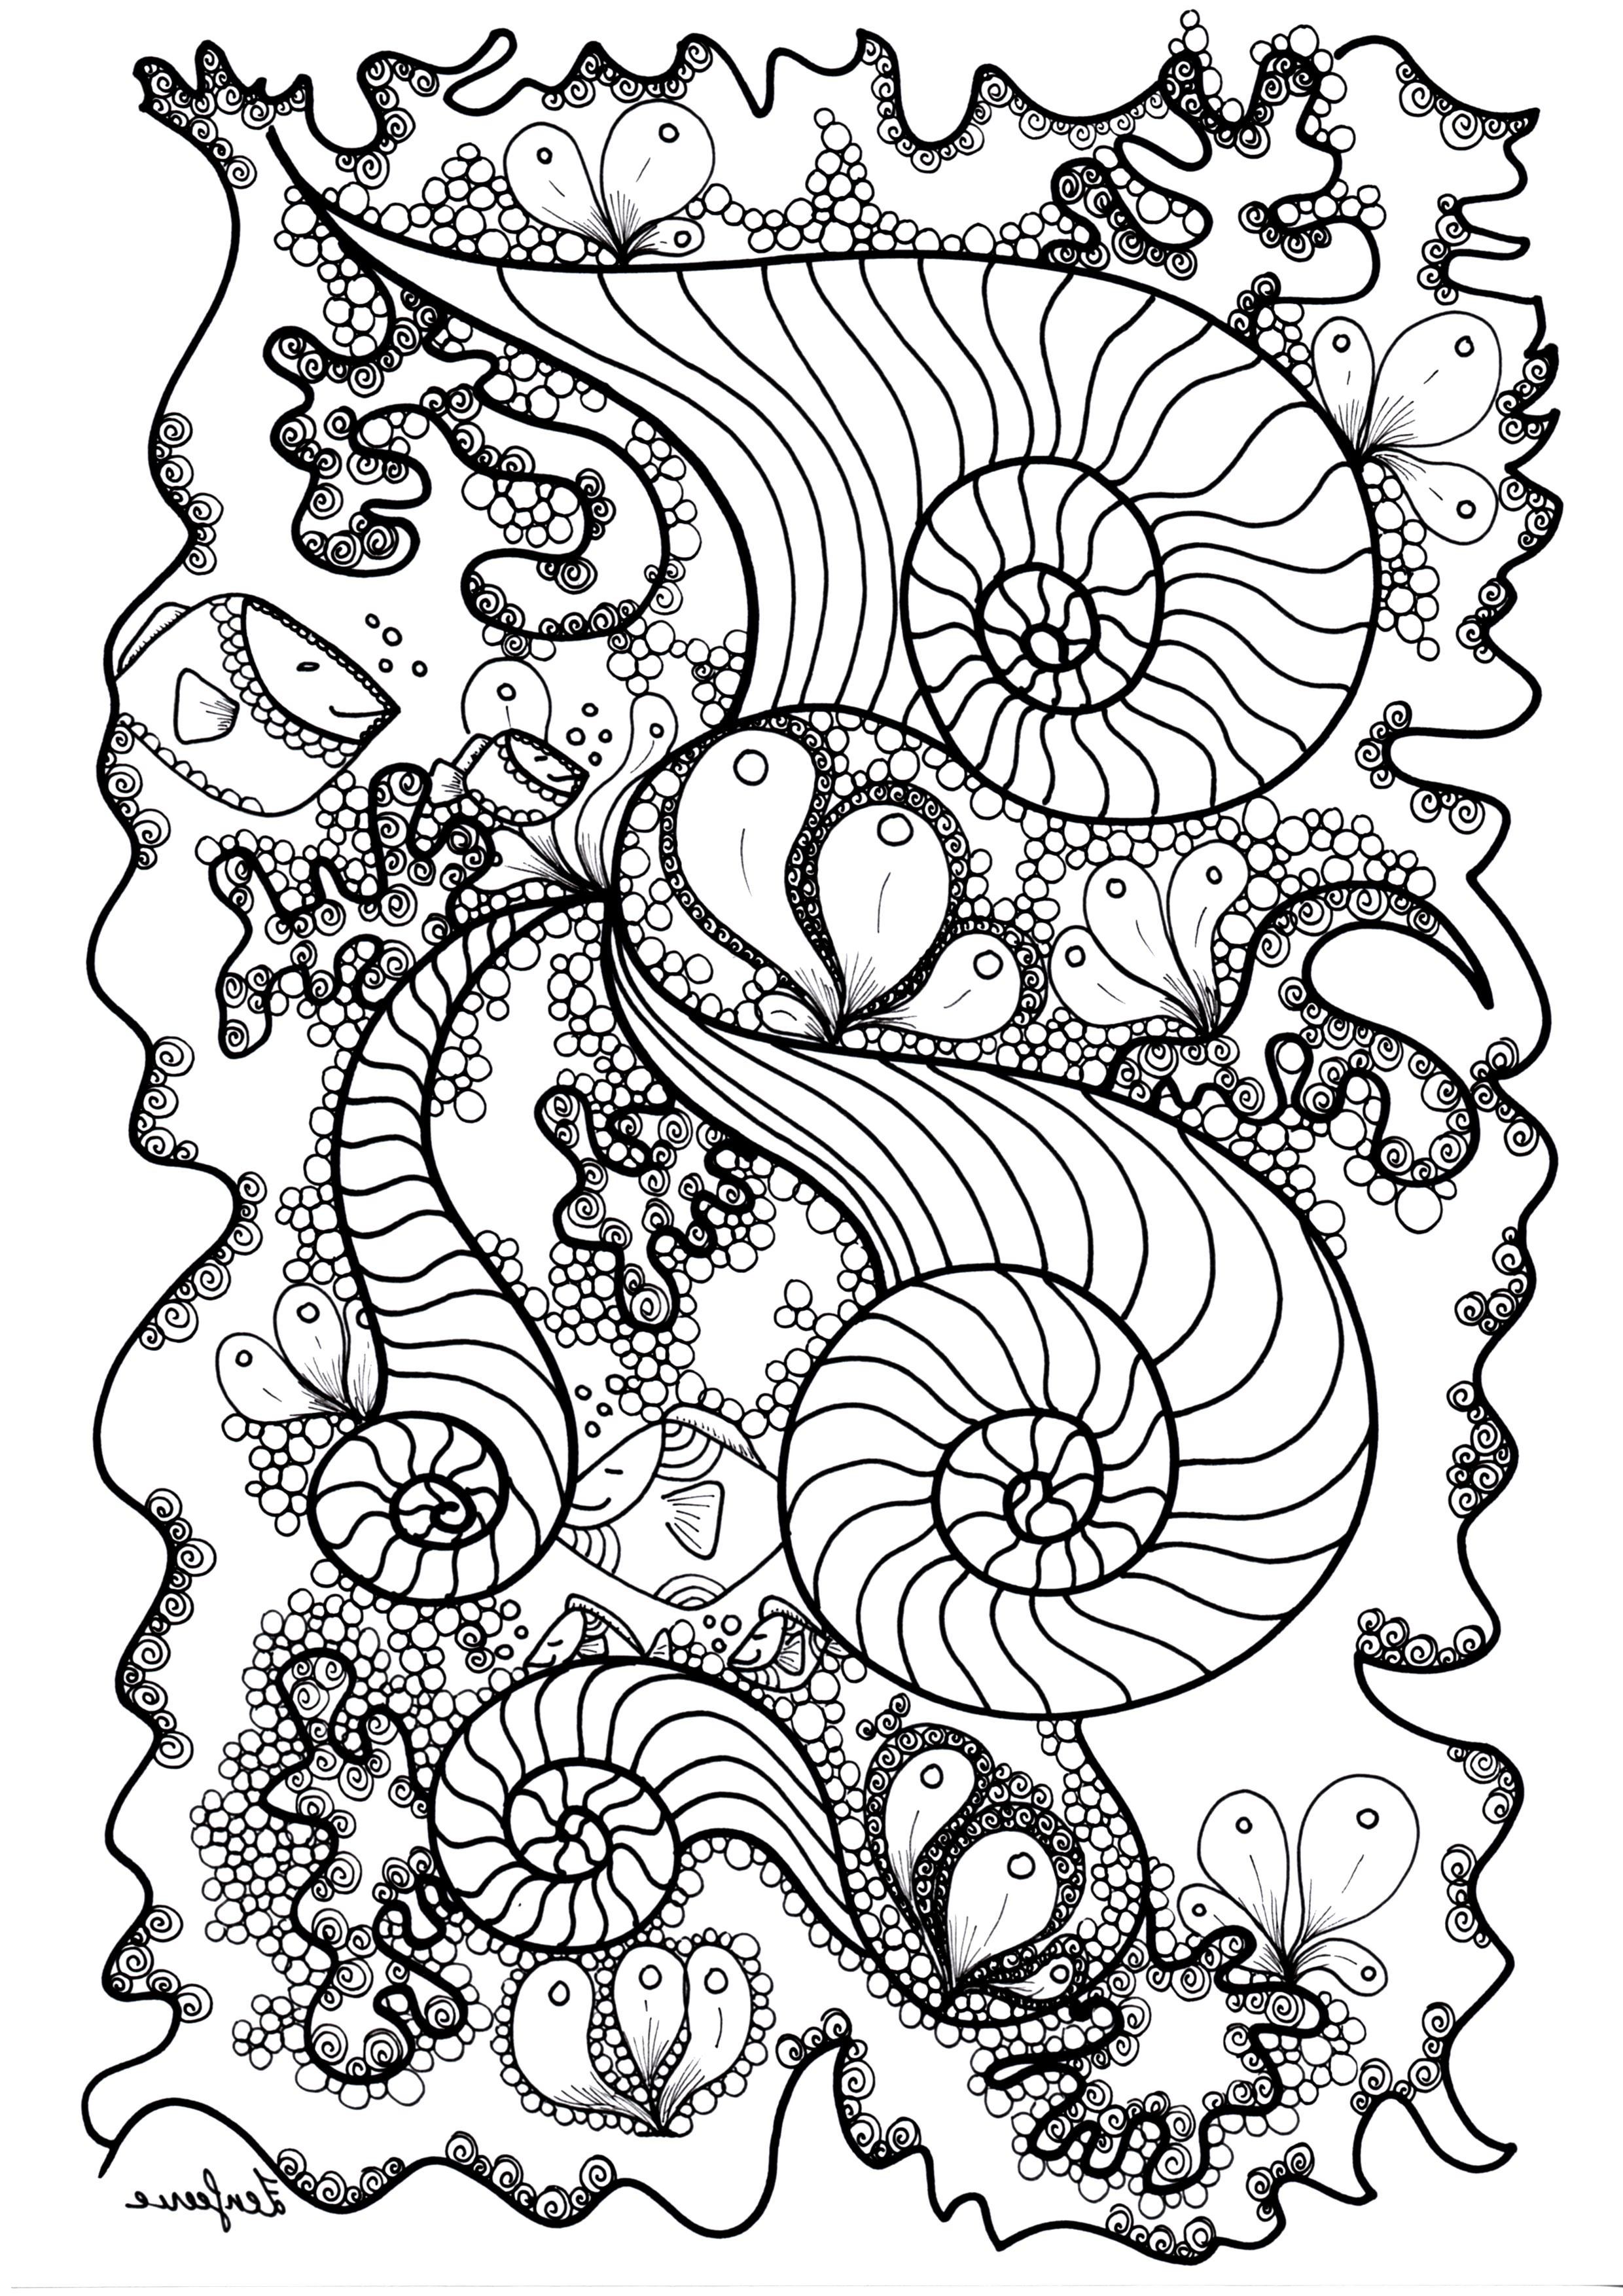 image=zentangle coloriage adulte poisson by zenfeerie 1